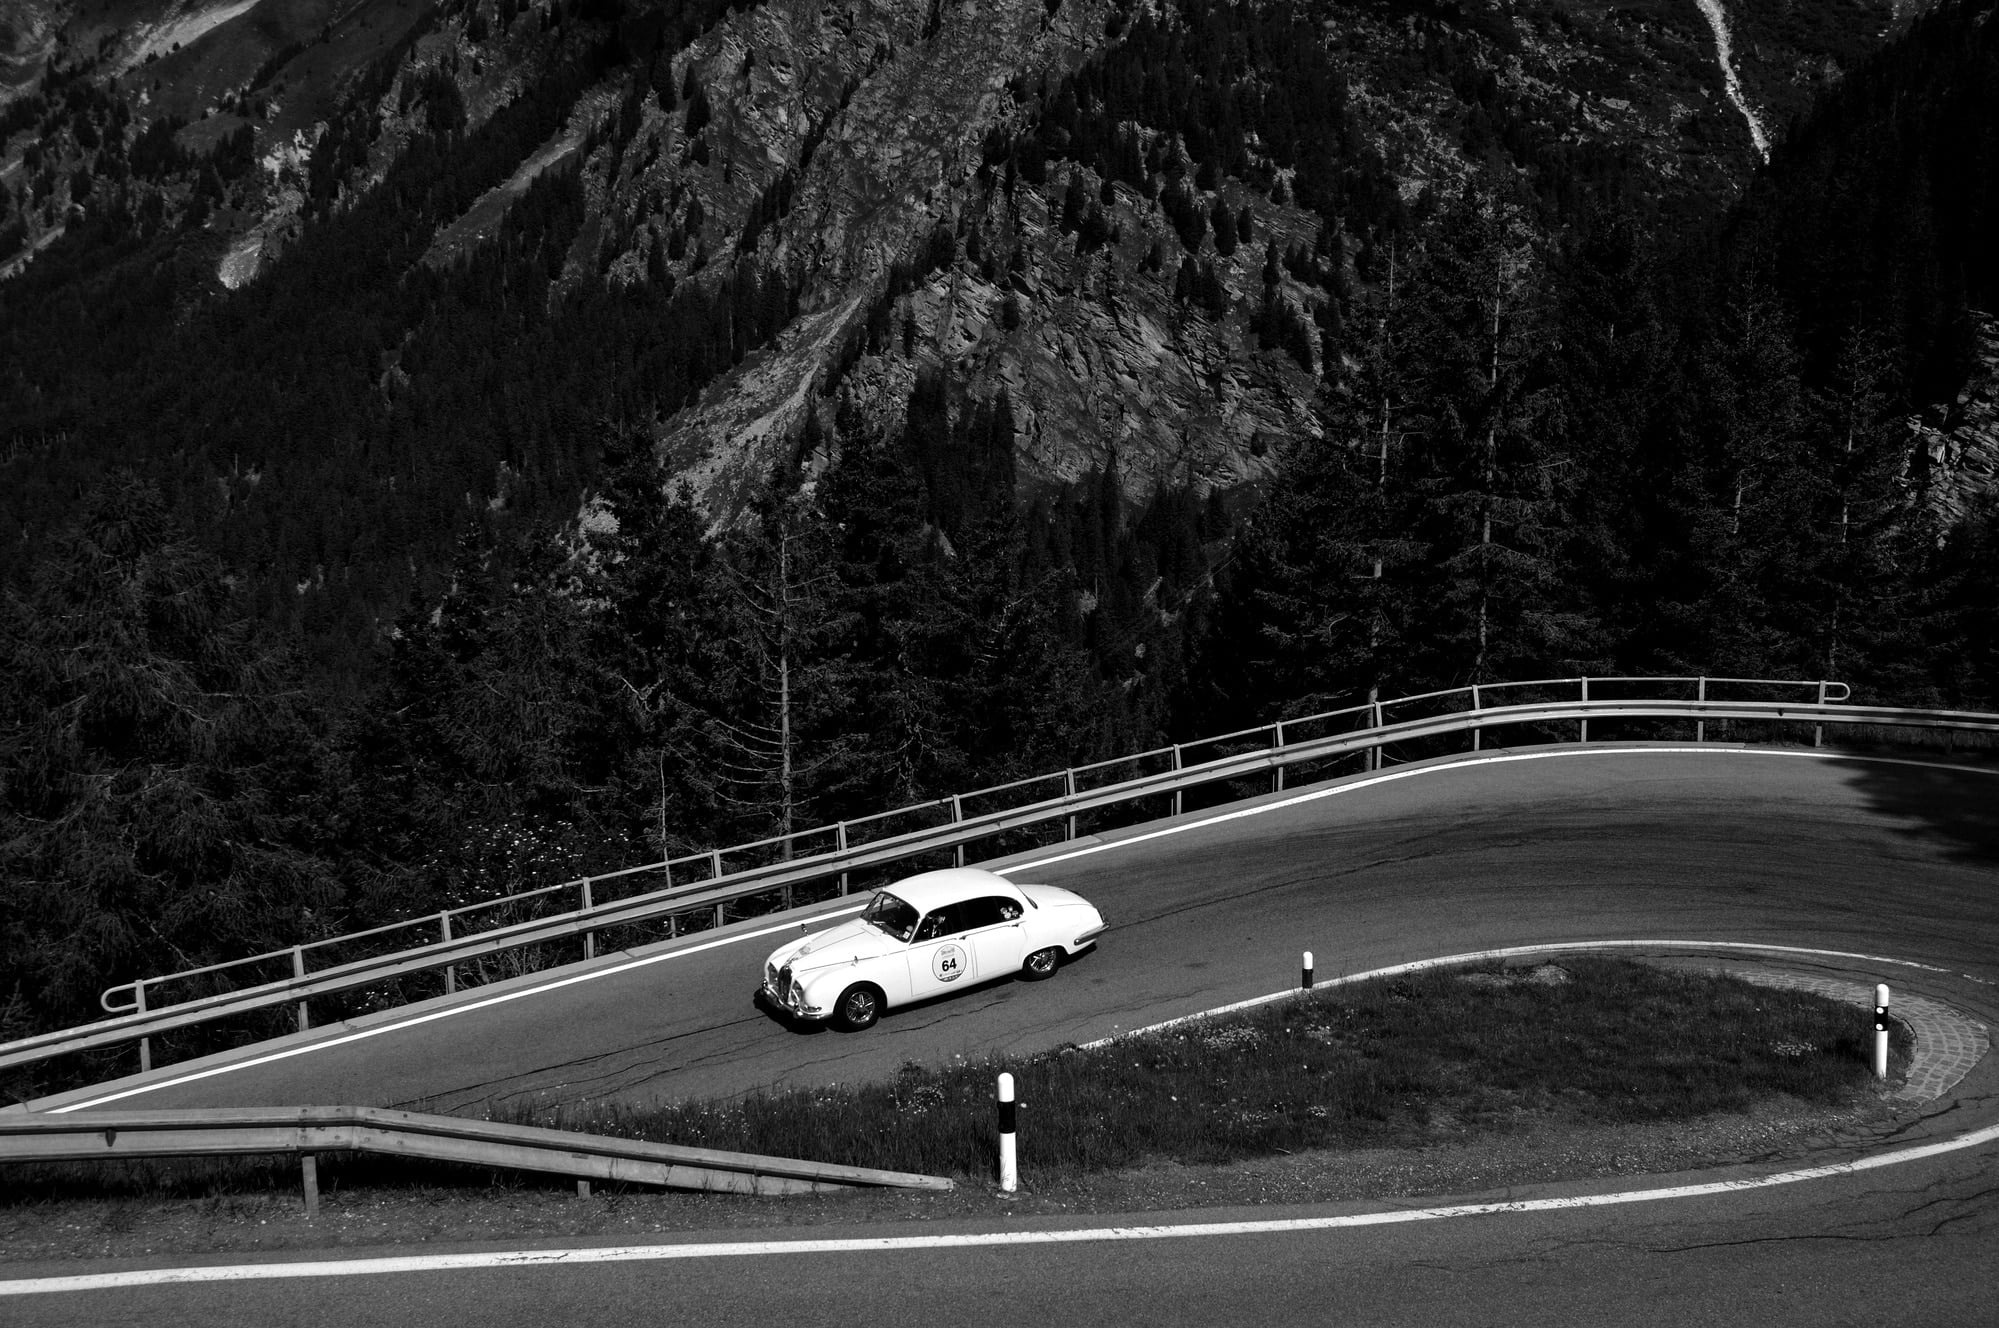 A white Jaguar S-Type takes part to the Summer Marathon classic car race near Maloja Pass, Switzerland. This car was built in 1965